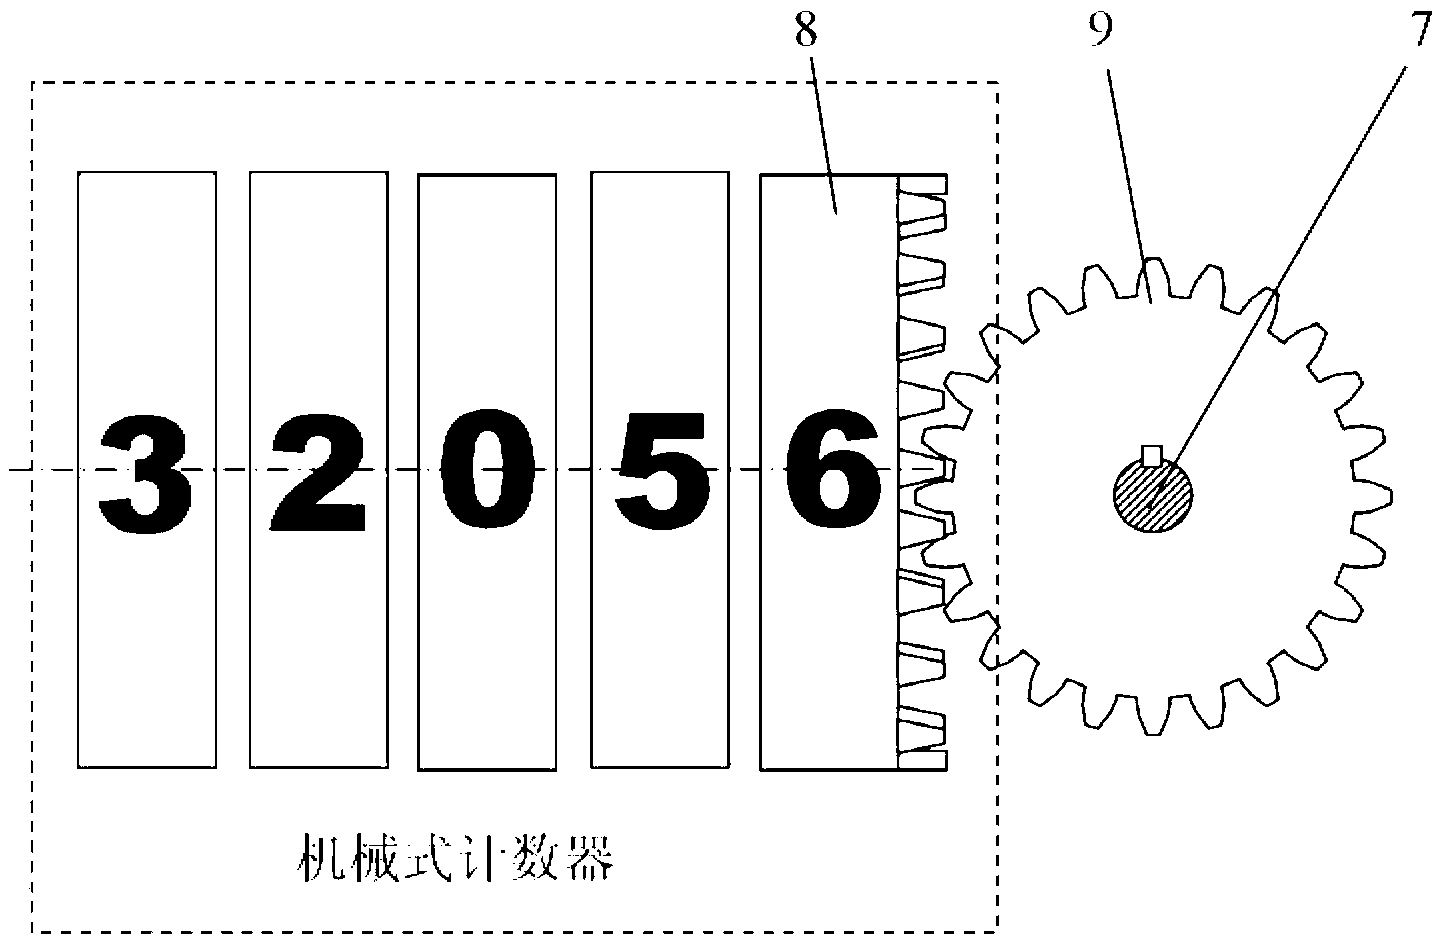 Full-automatic step counting device based on upper arm swinging